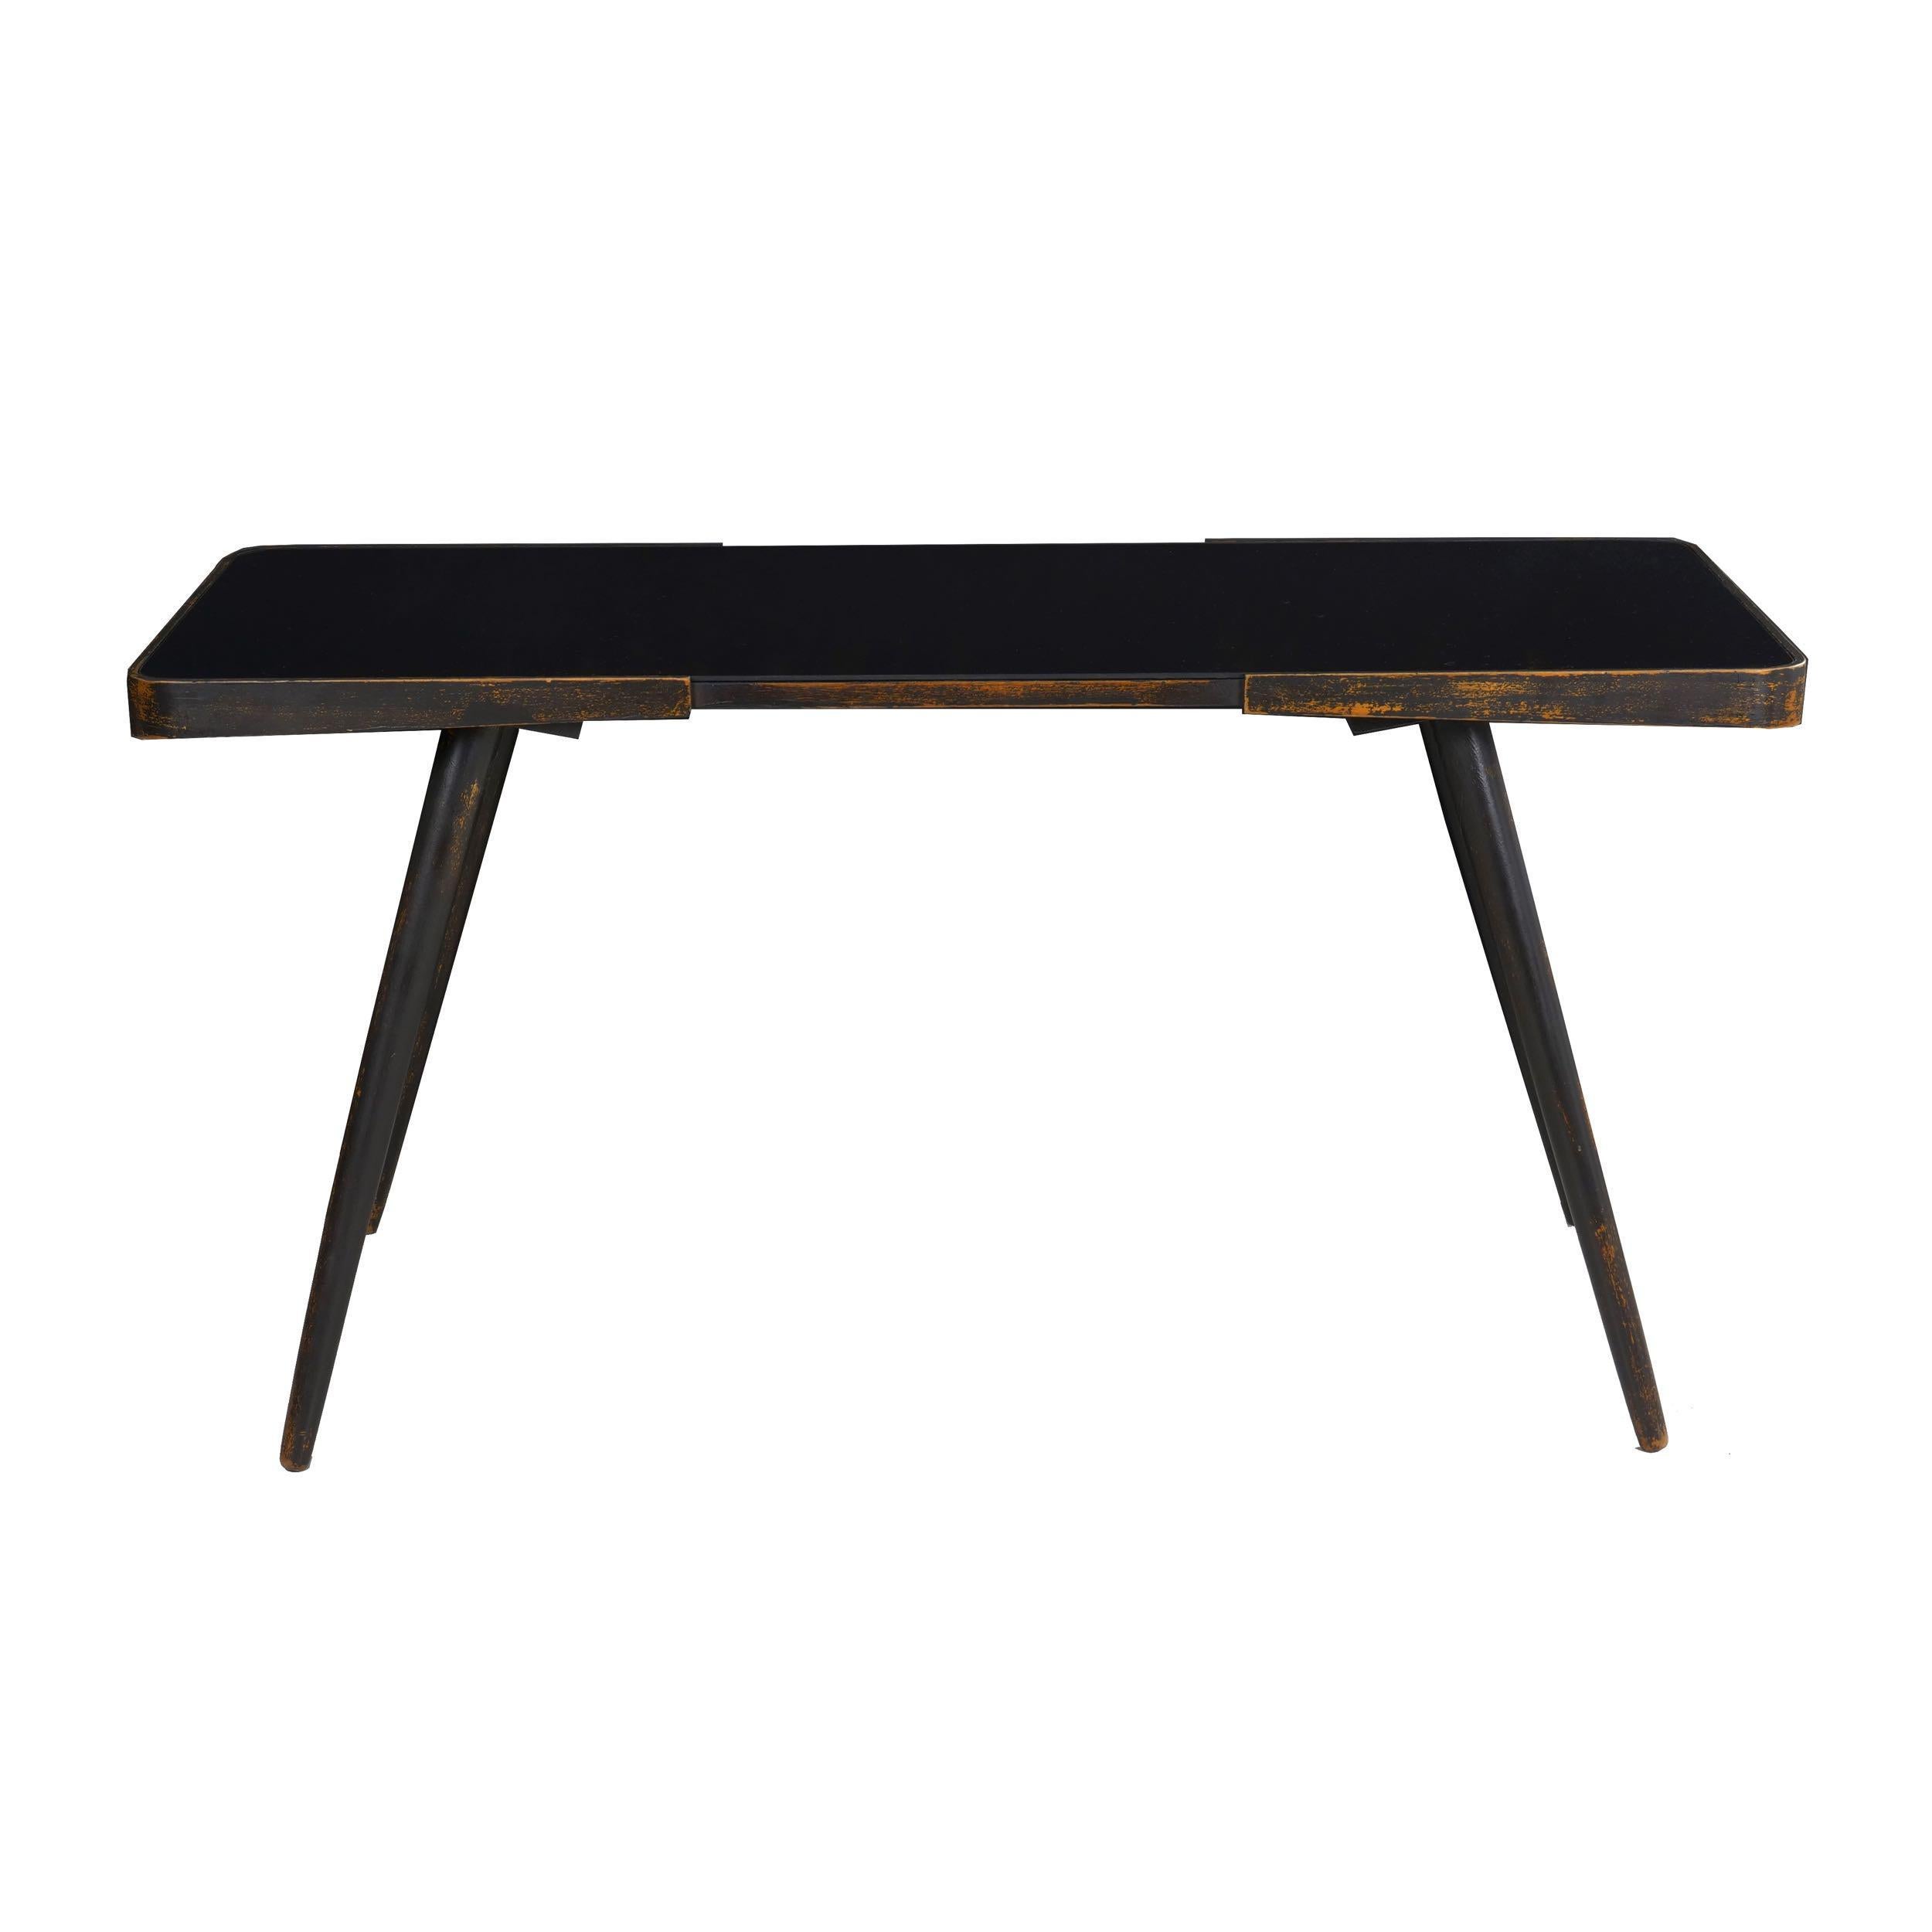 Vintage ebonized beech splay-legged cocktail table with black glass
Continental, circa 20th century
Item # 010PKT22L 

An incredibly sleek and attractive cocktail table, it is a beautifully crafted work of elegance. The frame is formed from